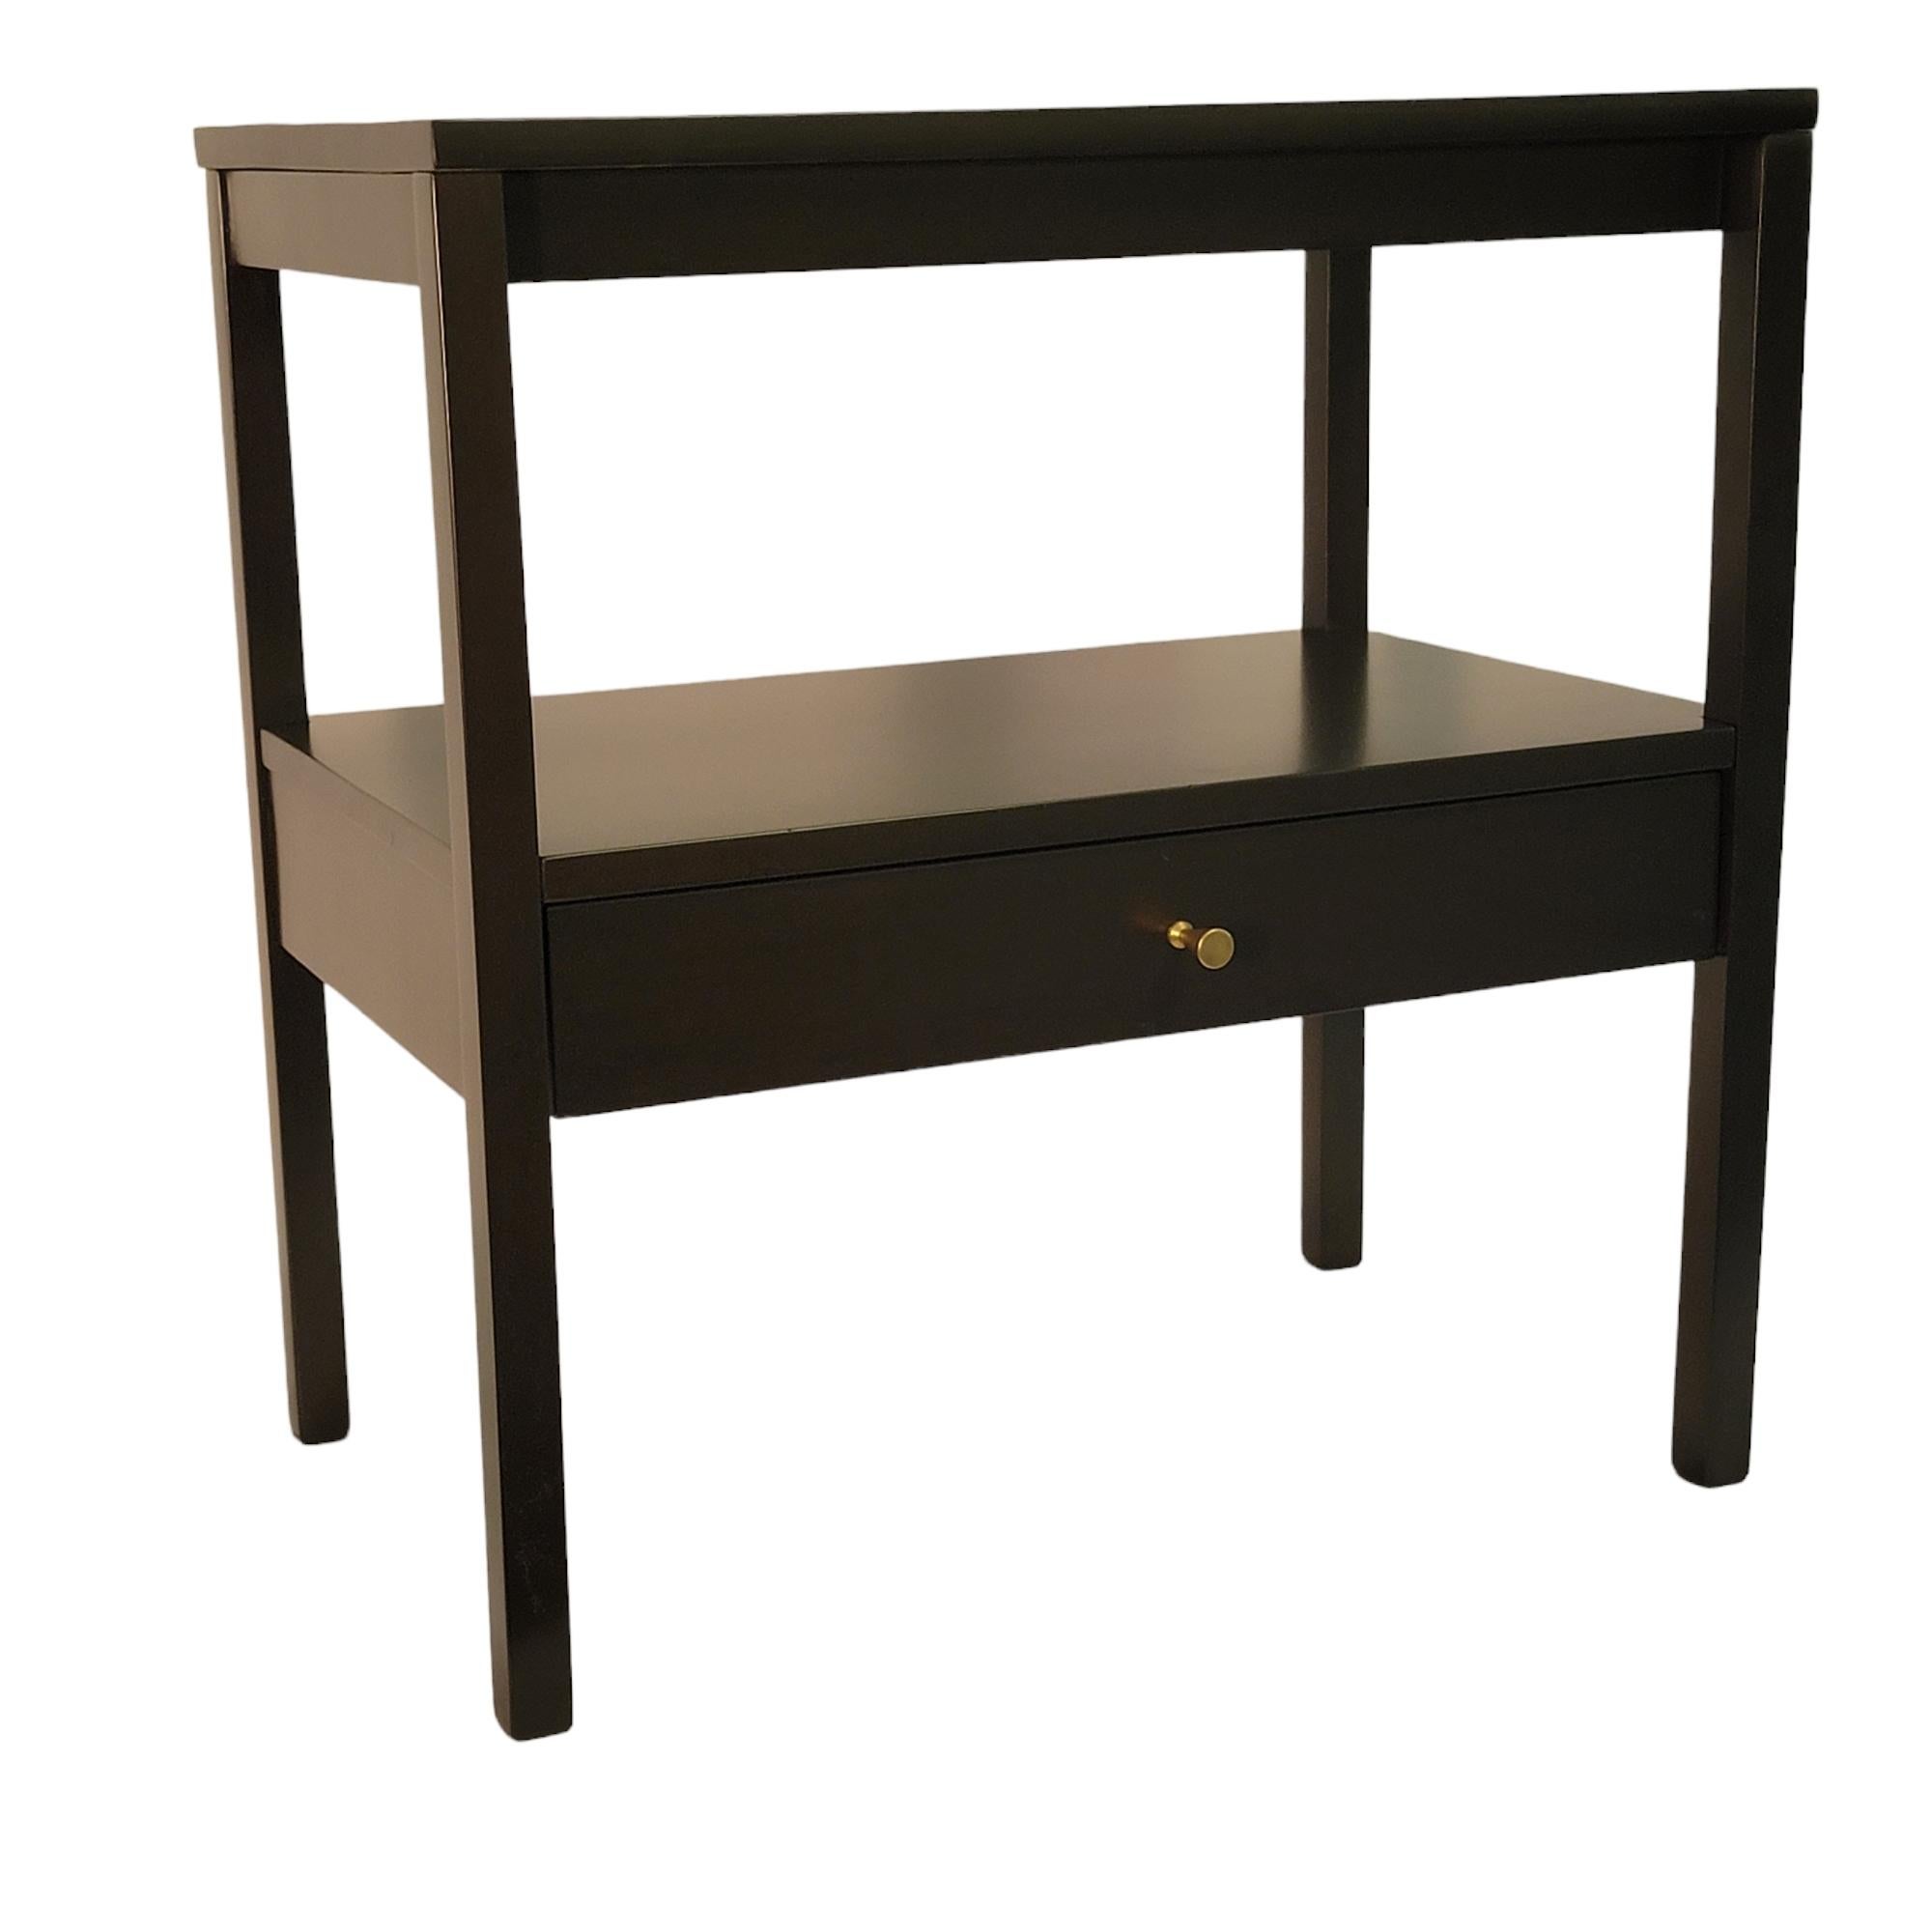 A very special pair of iconic Paul McCobb end tables/night stands. These mid century modern pieces are constructed in maple and lacquered in blackened brown. The hardware is original. Stylish and highly utilitarian, these end tables/night stands are